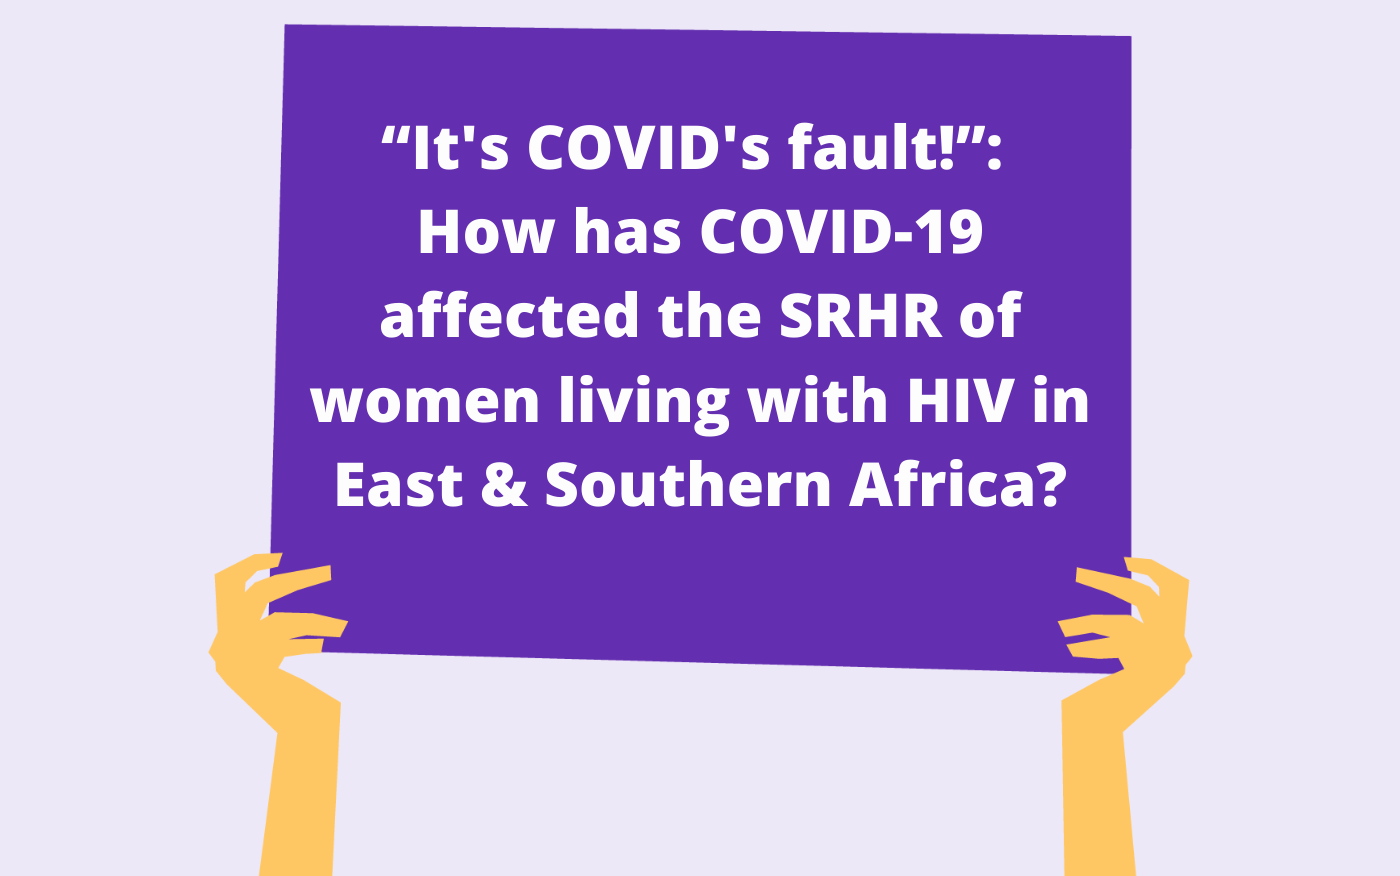 ePoster: understanding how COVID-19 affected the sexual & reproductive health of women living with HIV